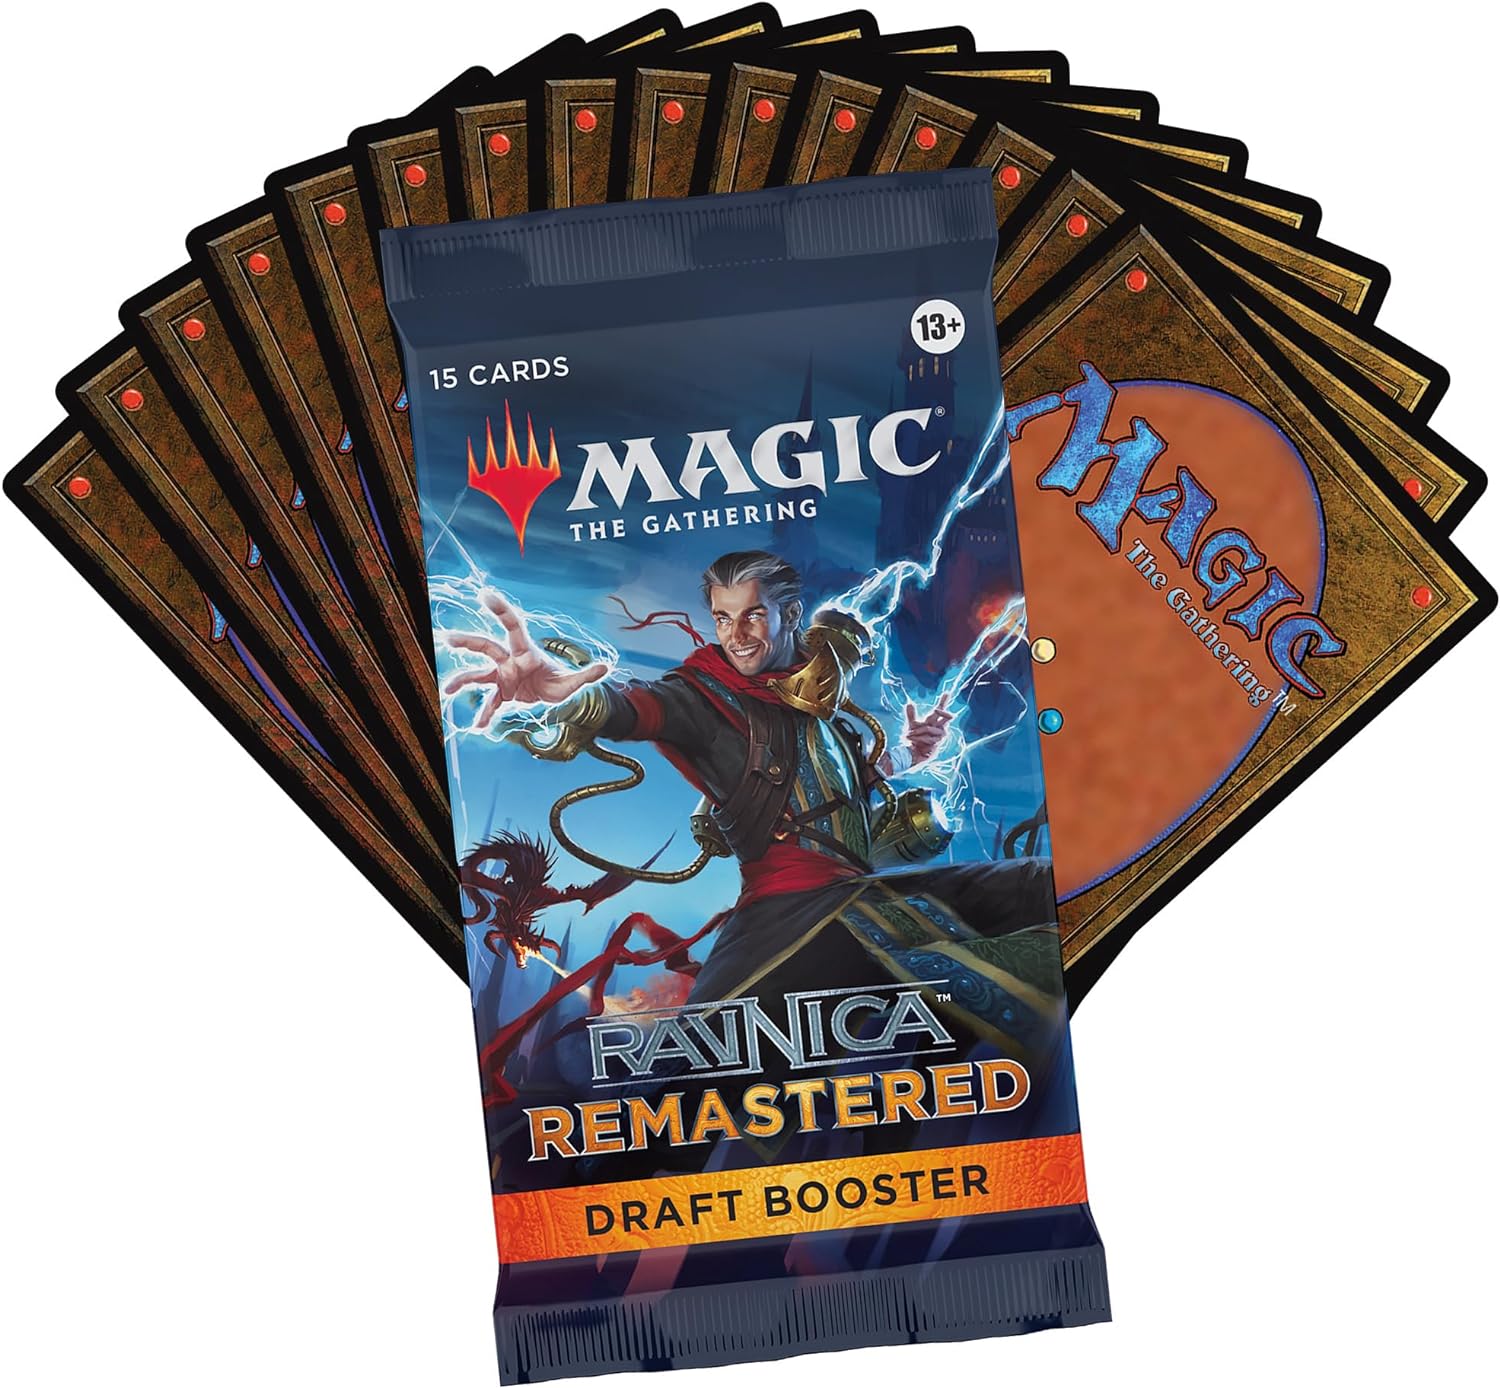 TCG (Trading Card Games)